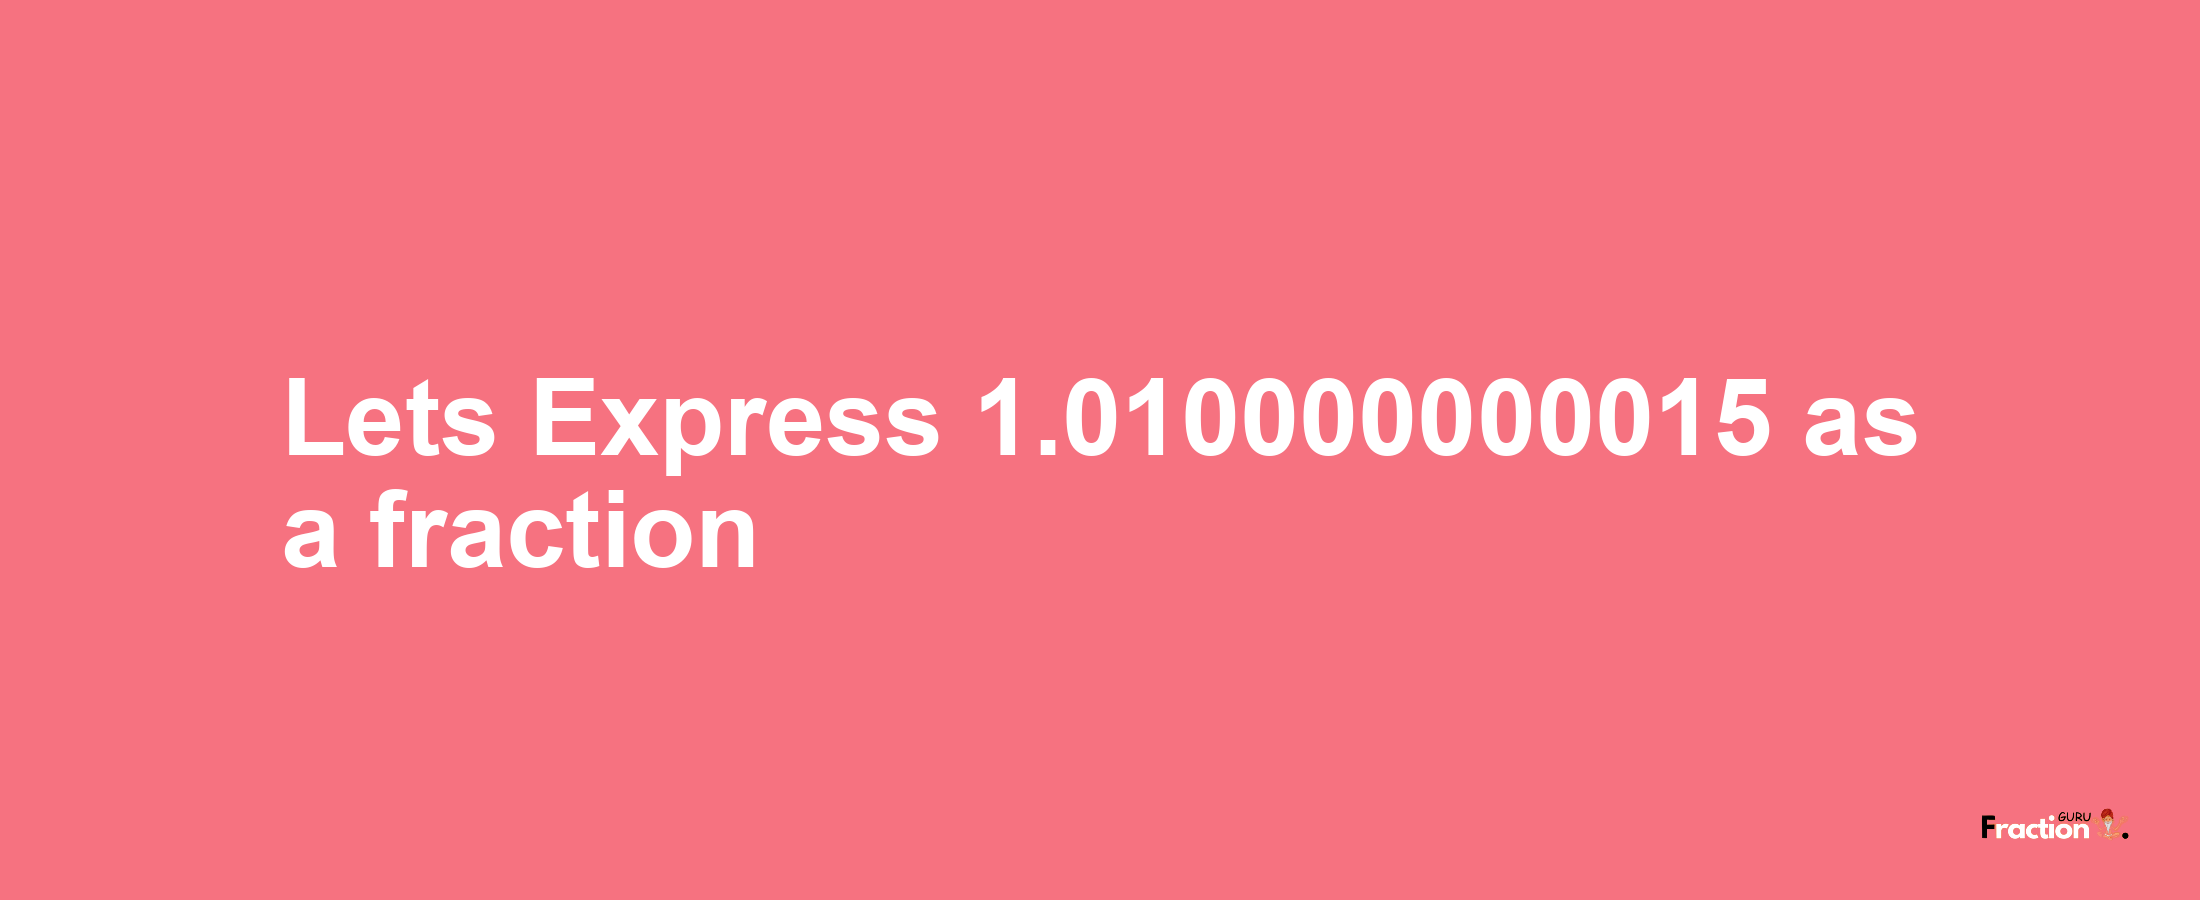 Lets Express 1.010000000015 as afraction